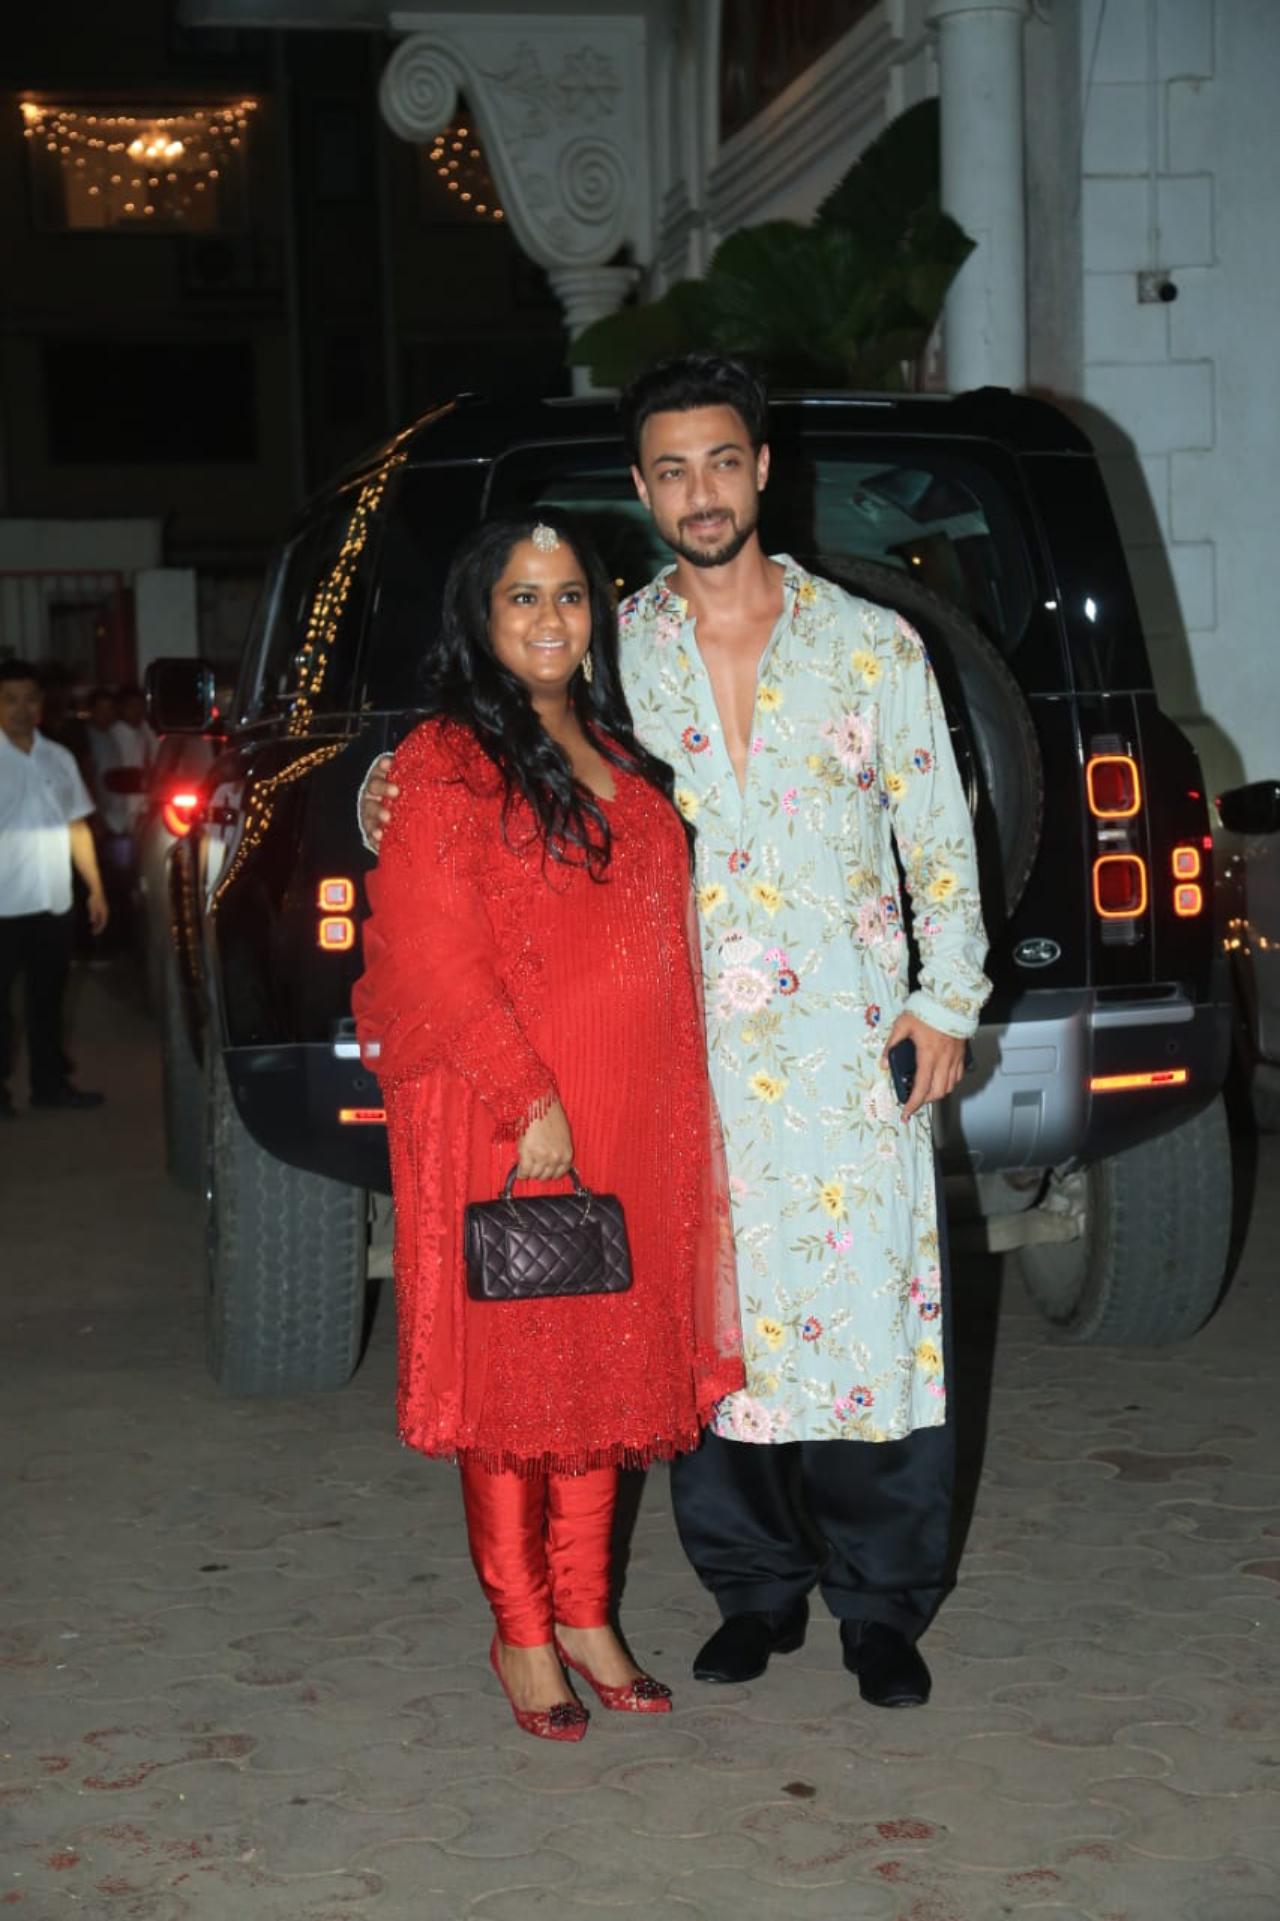 Arpita Khan and Aayush Sharma were also seen at the party